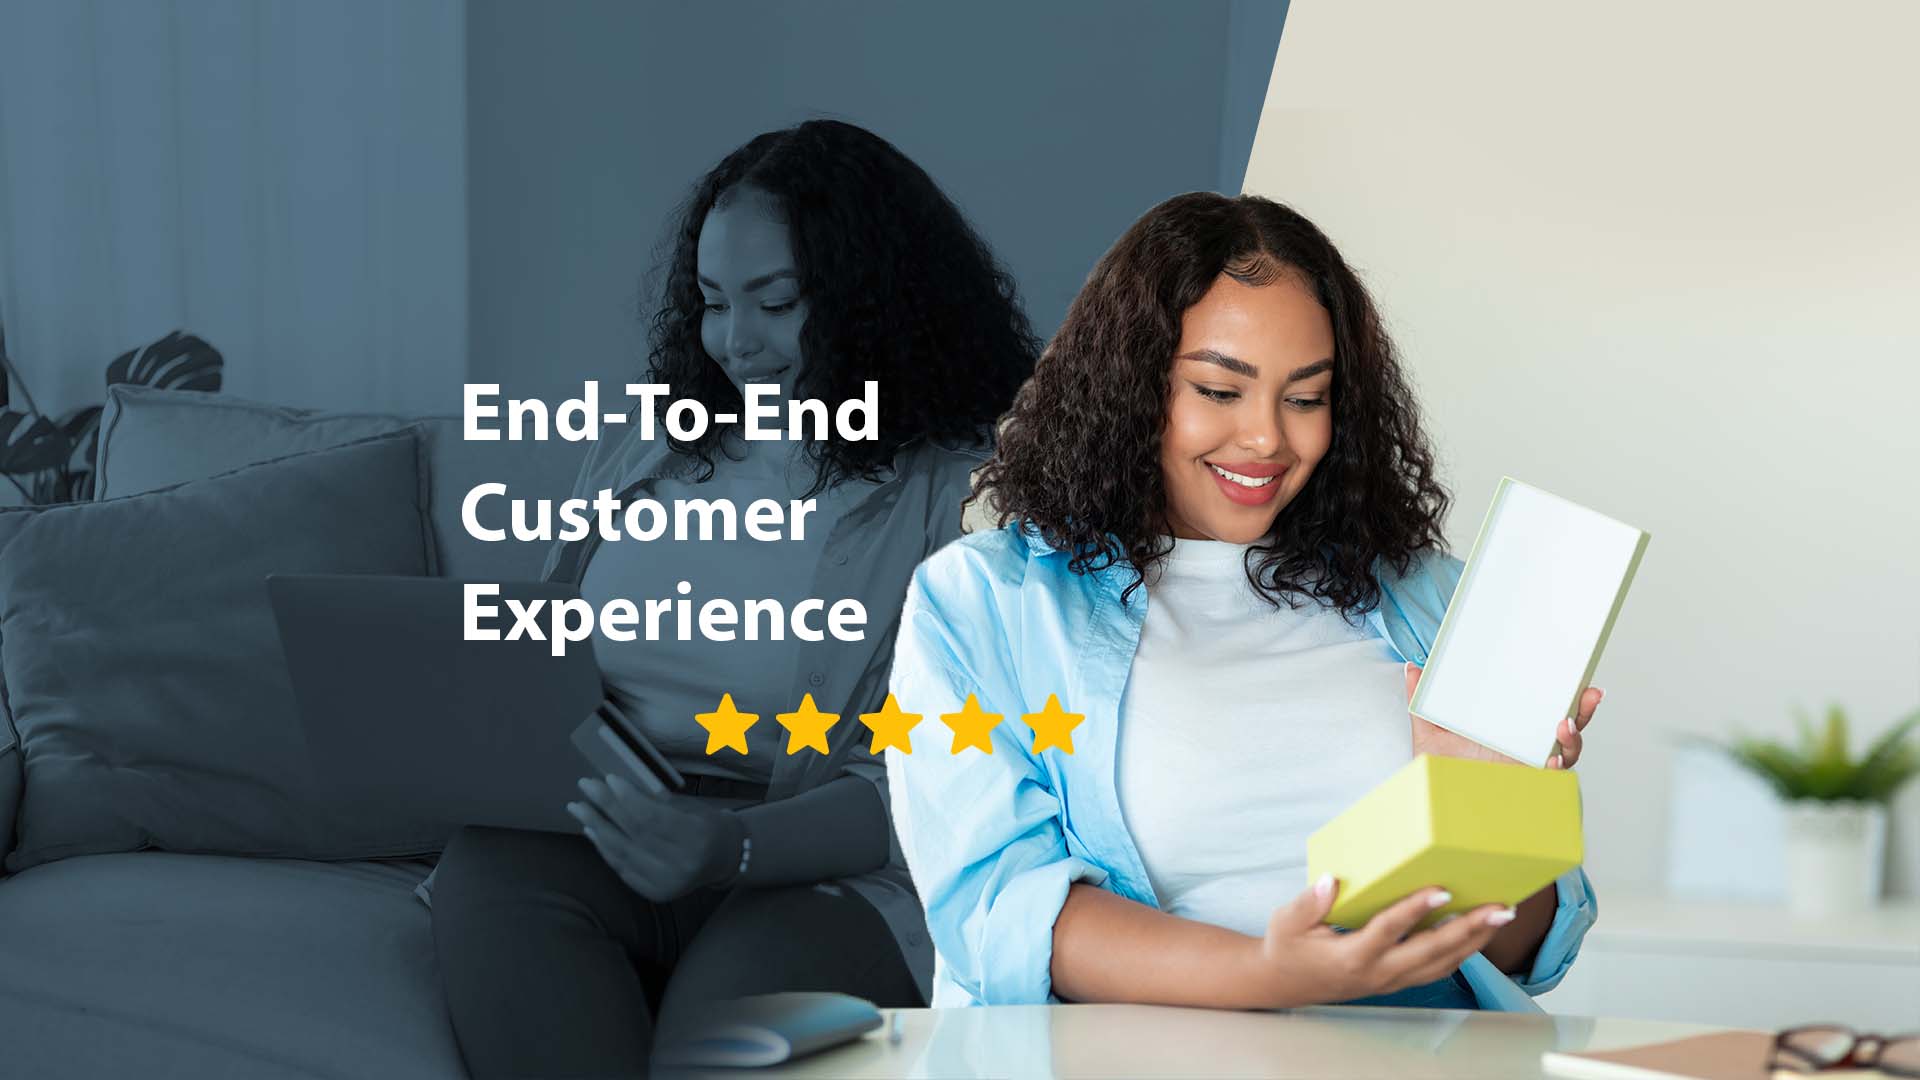 7 Ways To Level Up The End-To-End Customer Experience